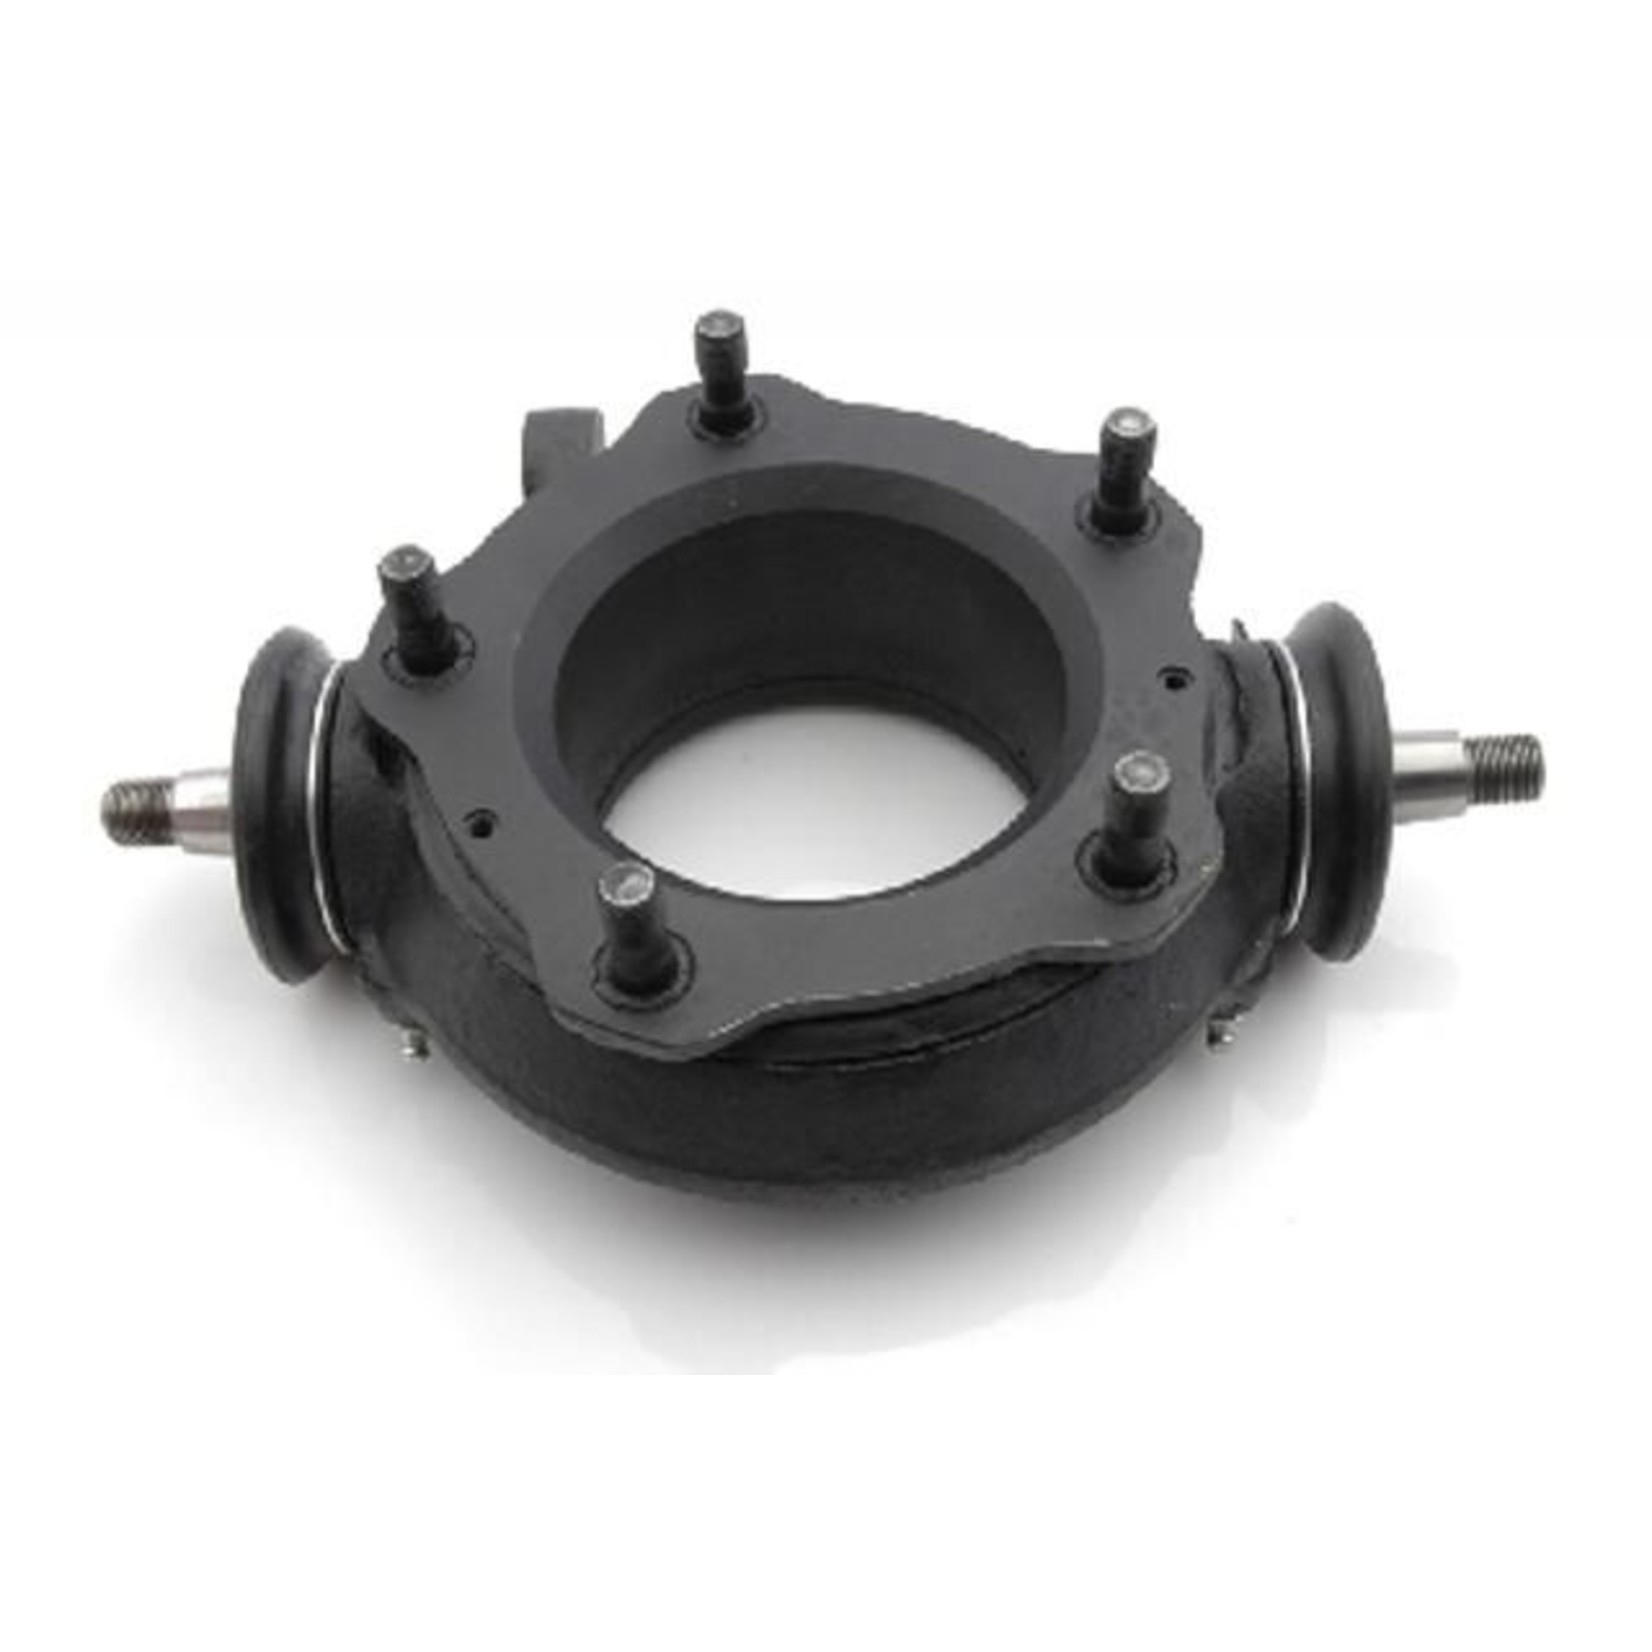 Pivot+new hubs left reconditioned Nr Org: 5409788